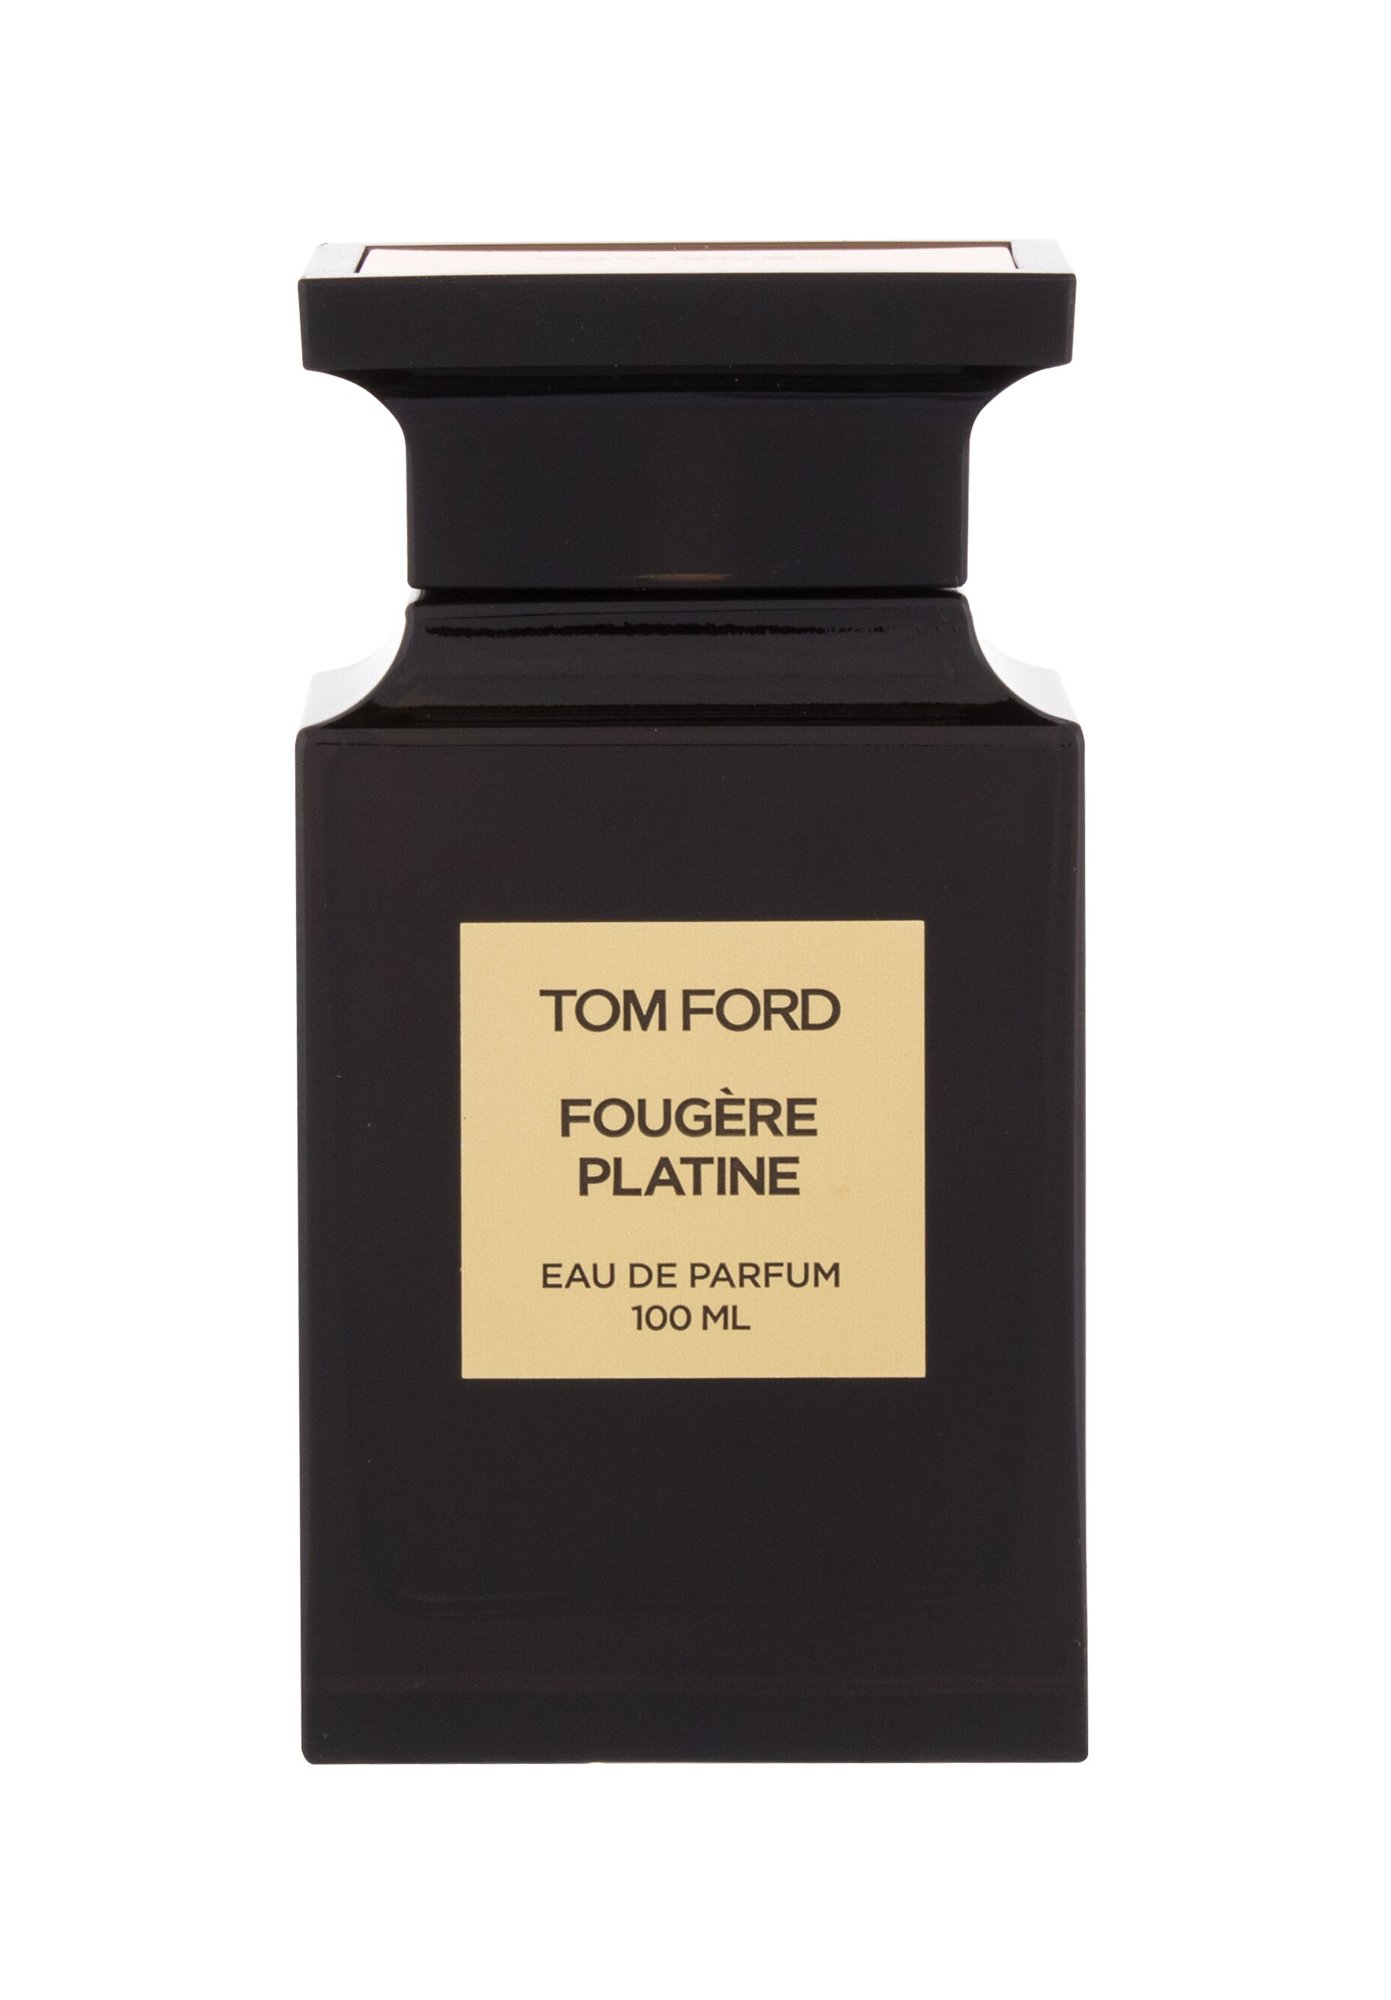 TOM FORD Private Blend